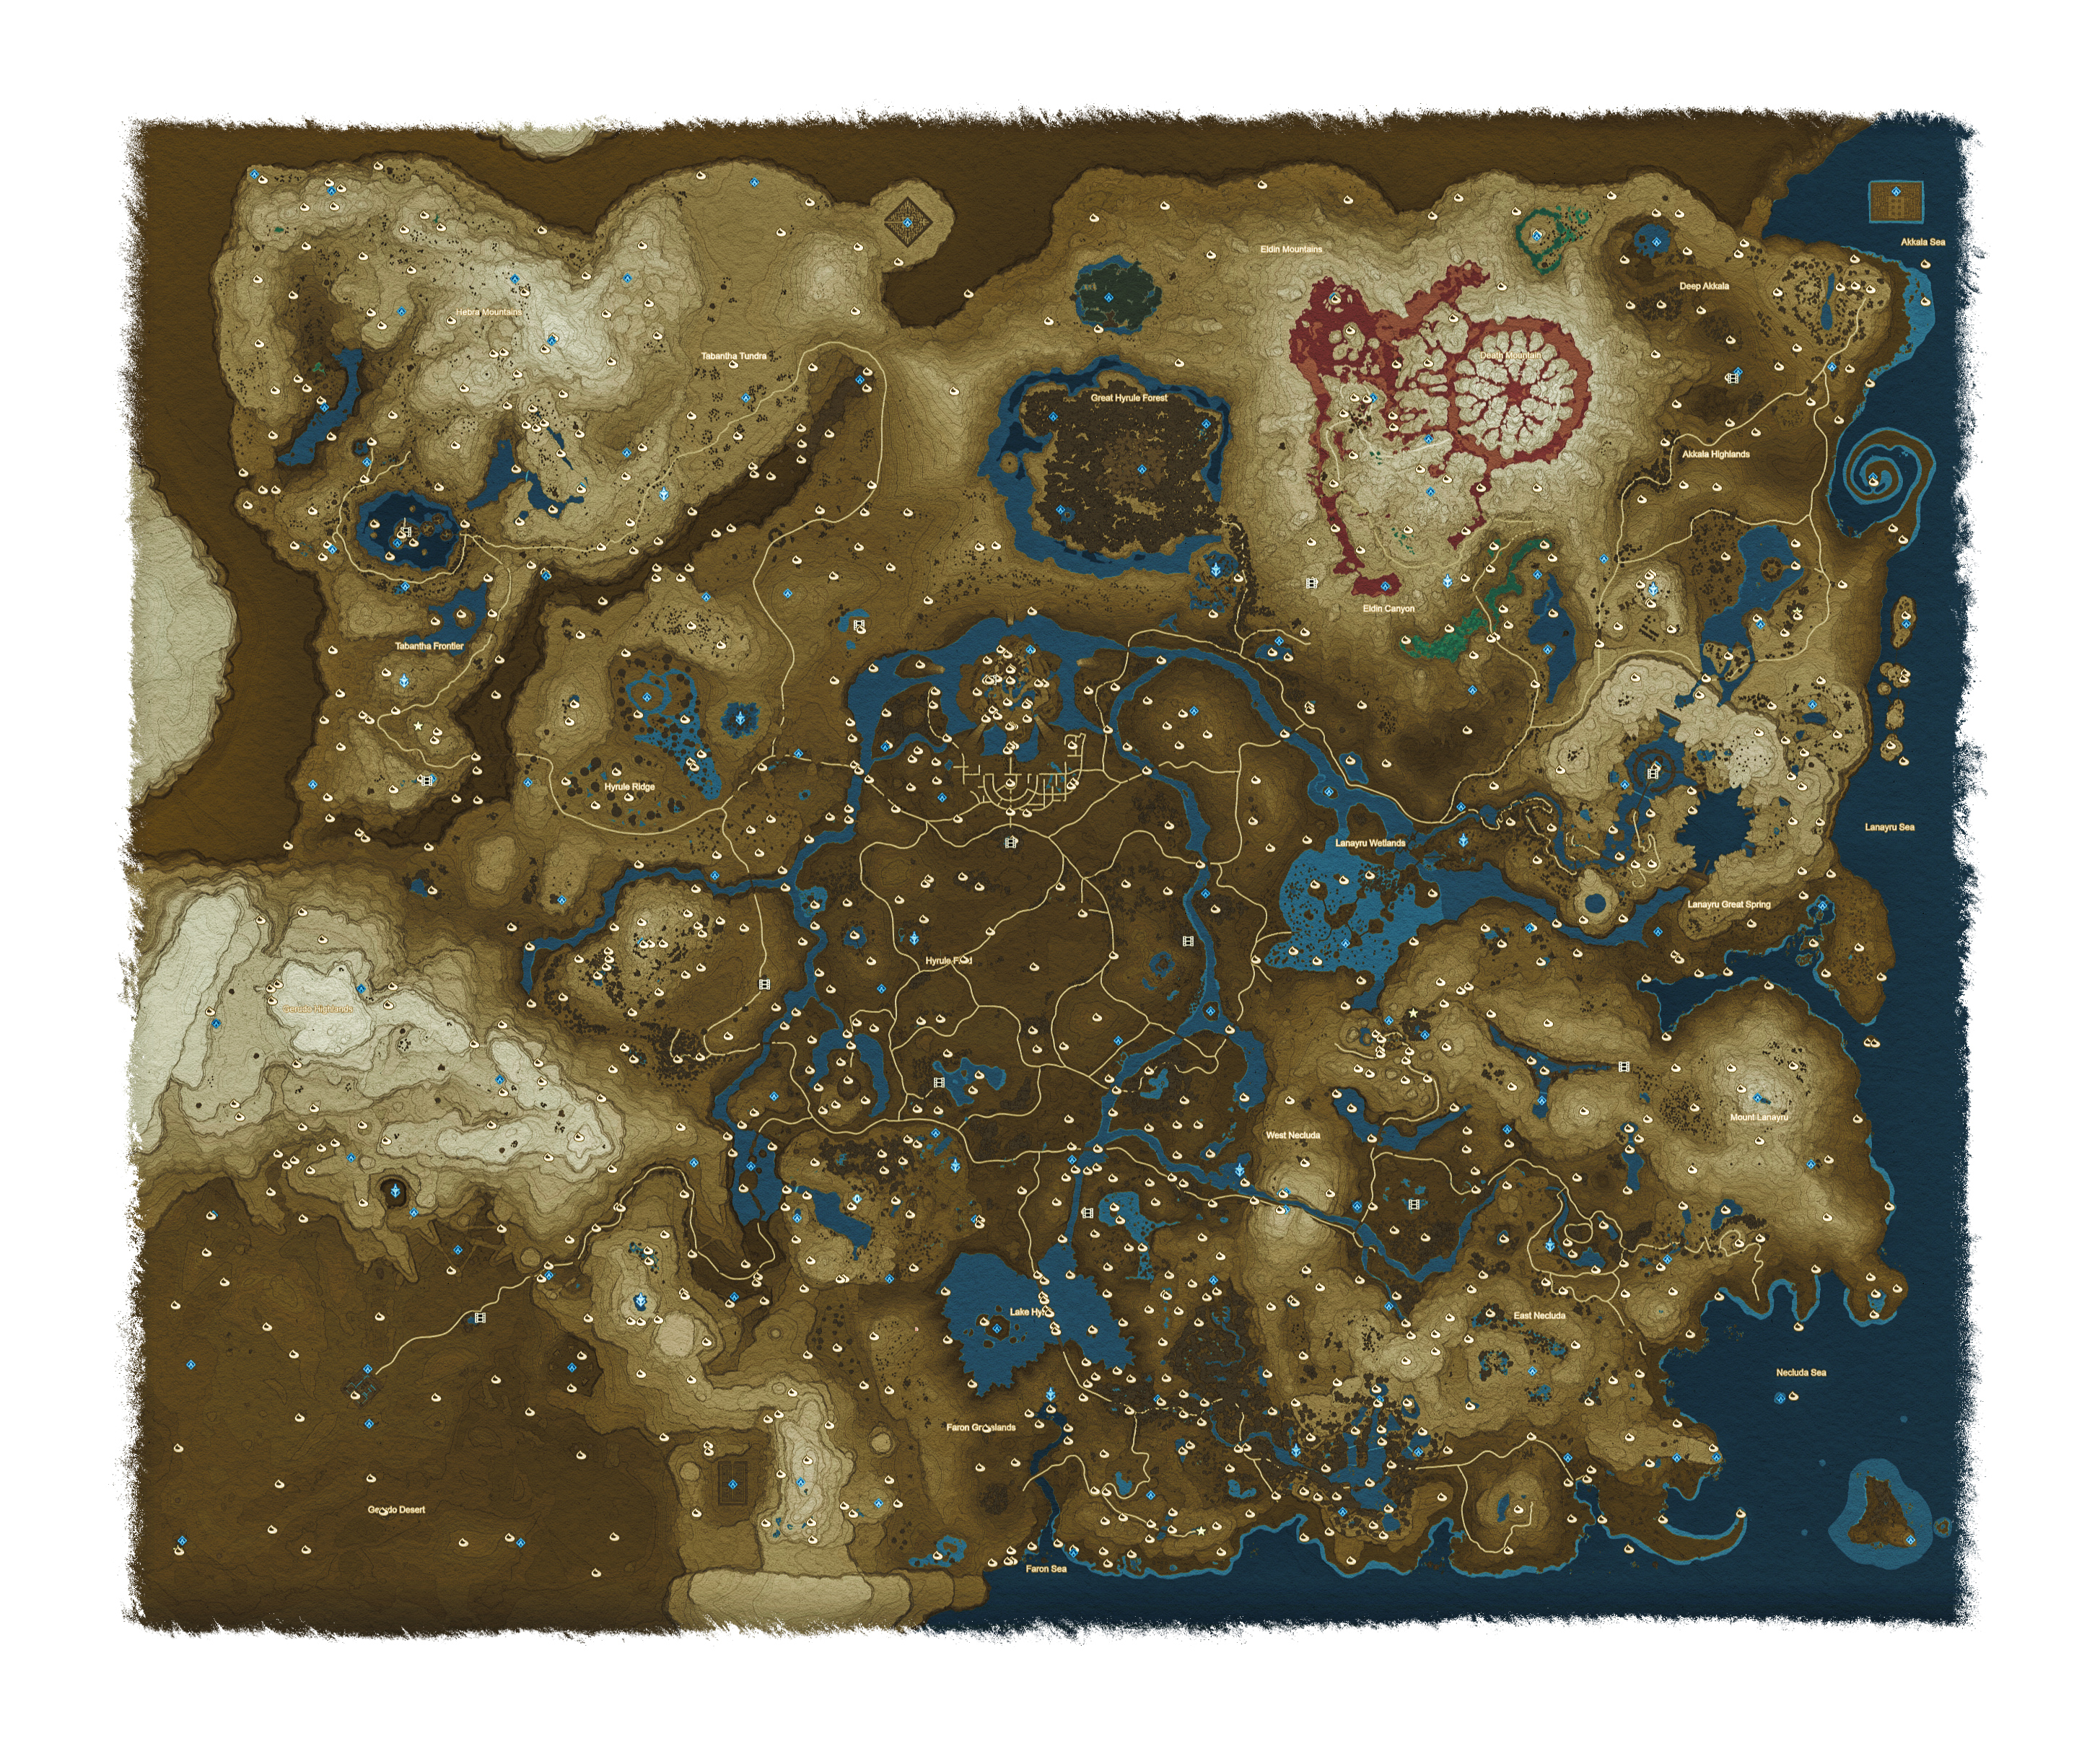 Explorable places of BotW marked on the map